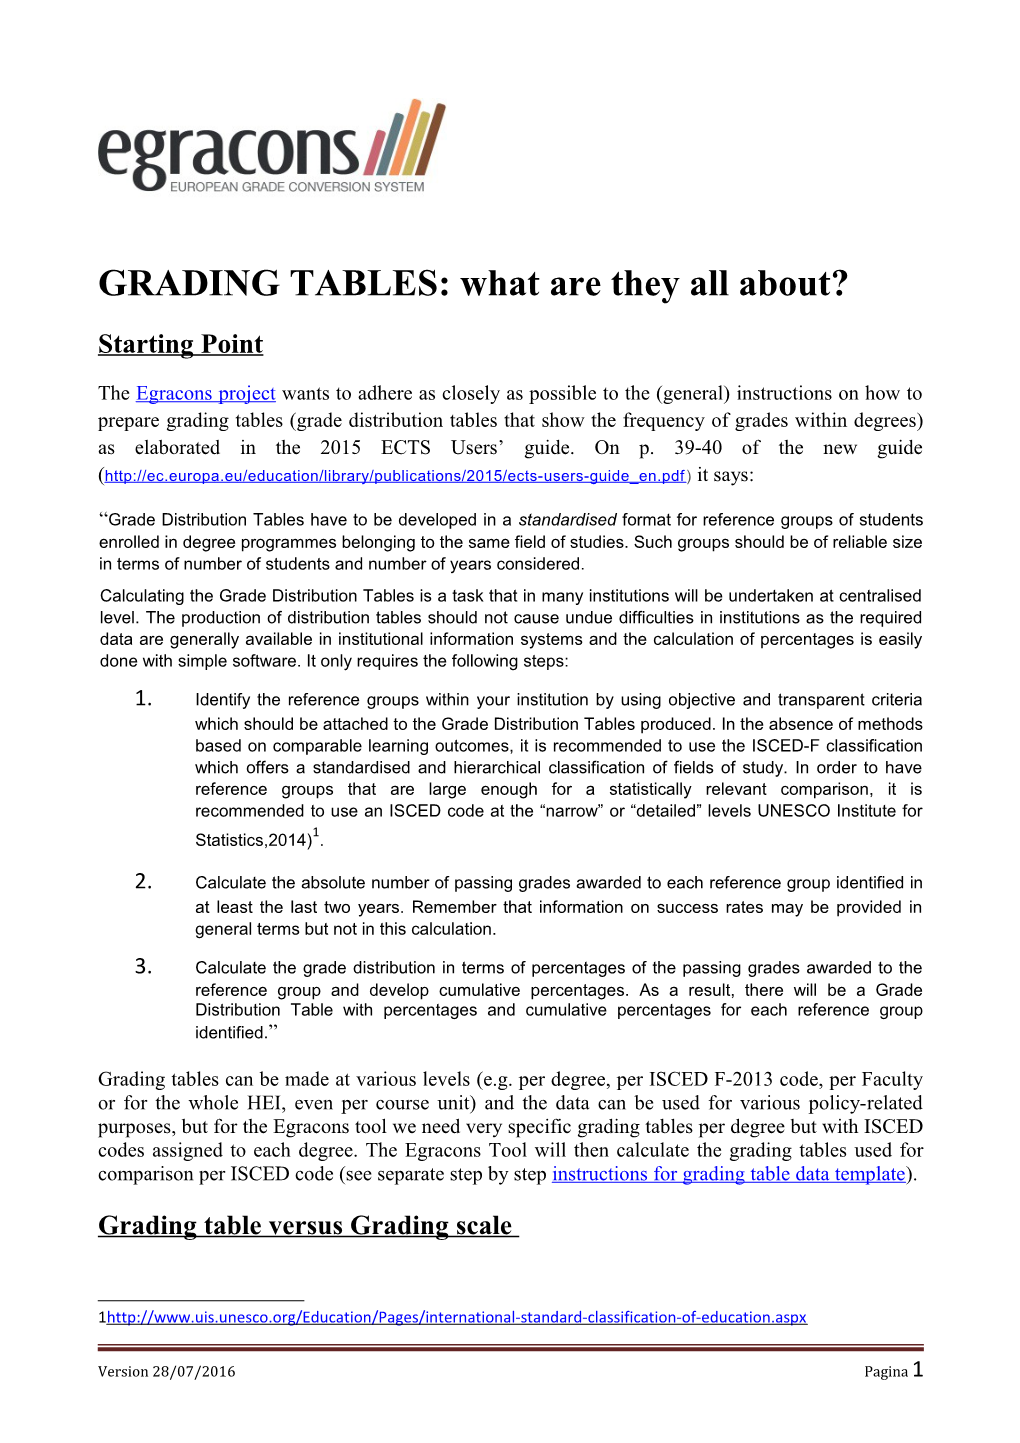 GRADING TABLES: What Are They All About?